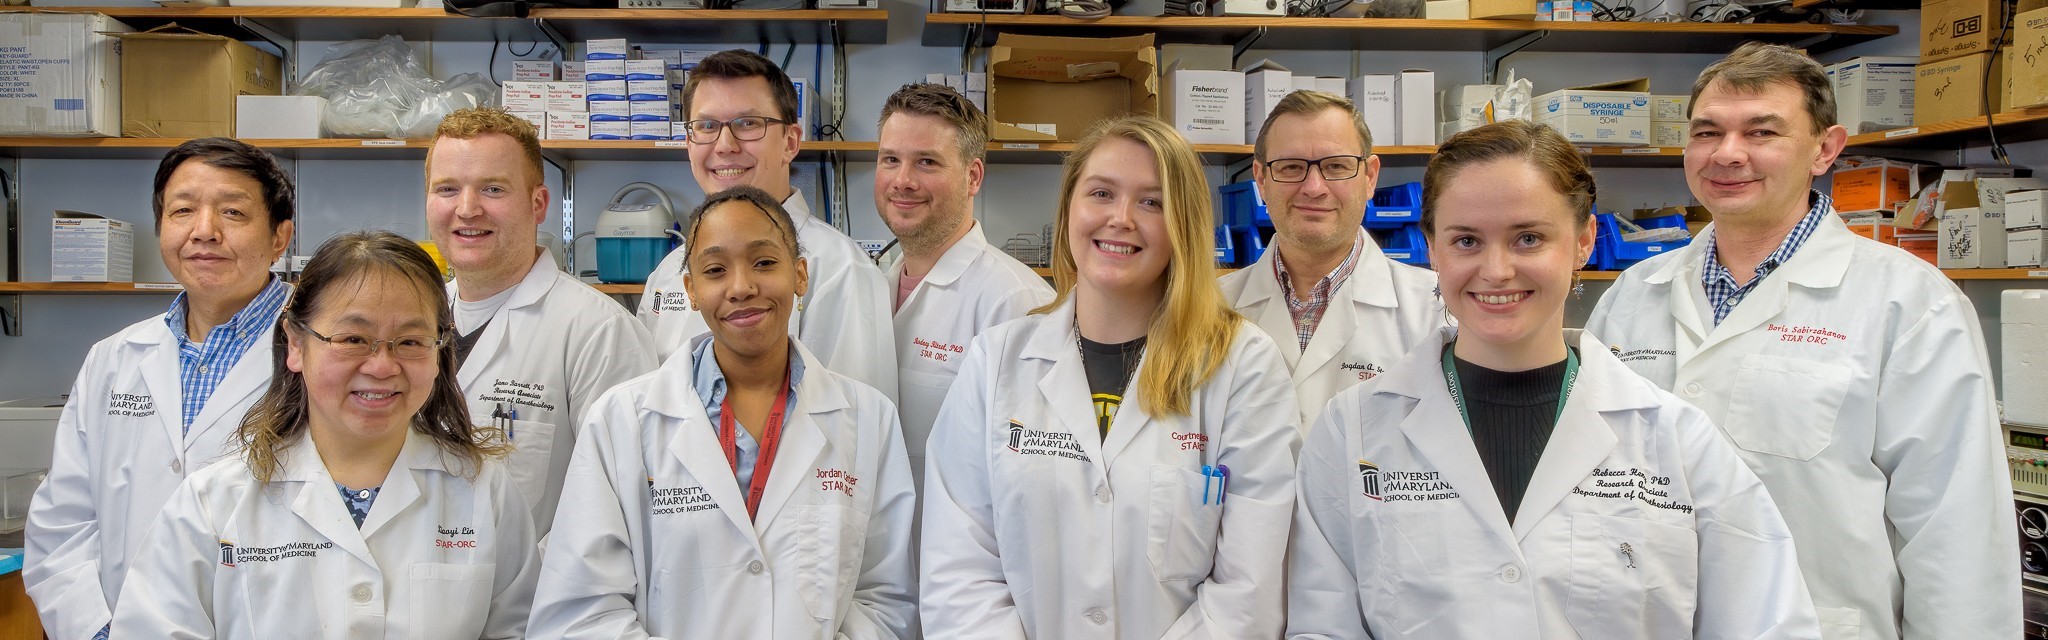 Members of Dr. Alan I. Faden and Dr. Bodgan Stoica's Lab Groups